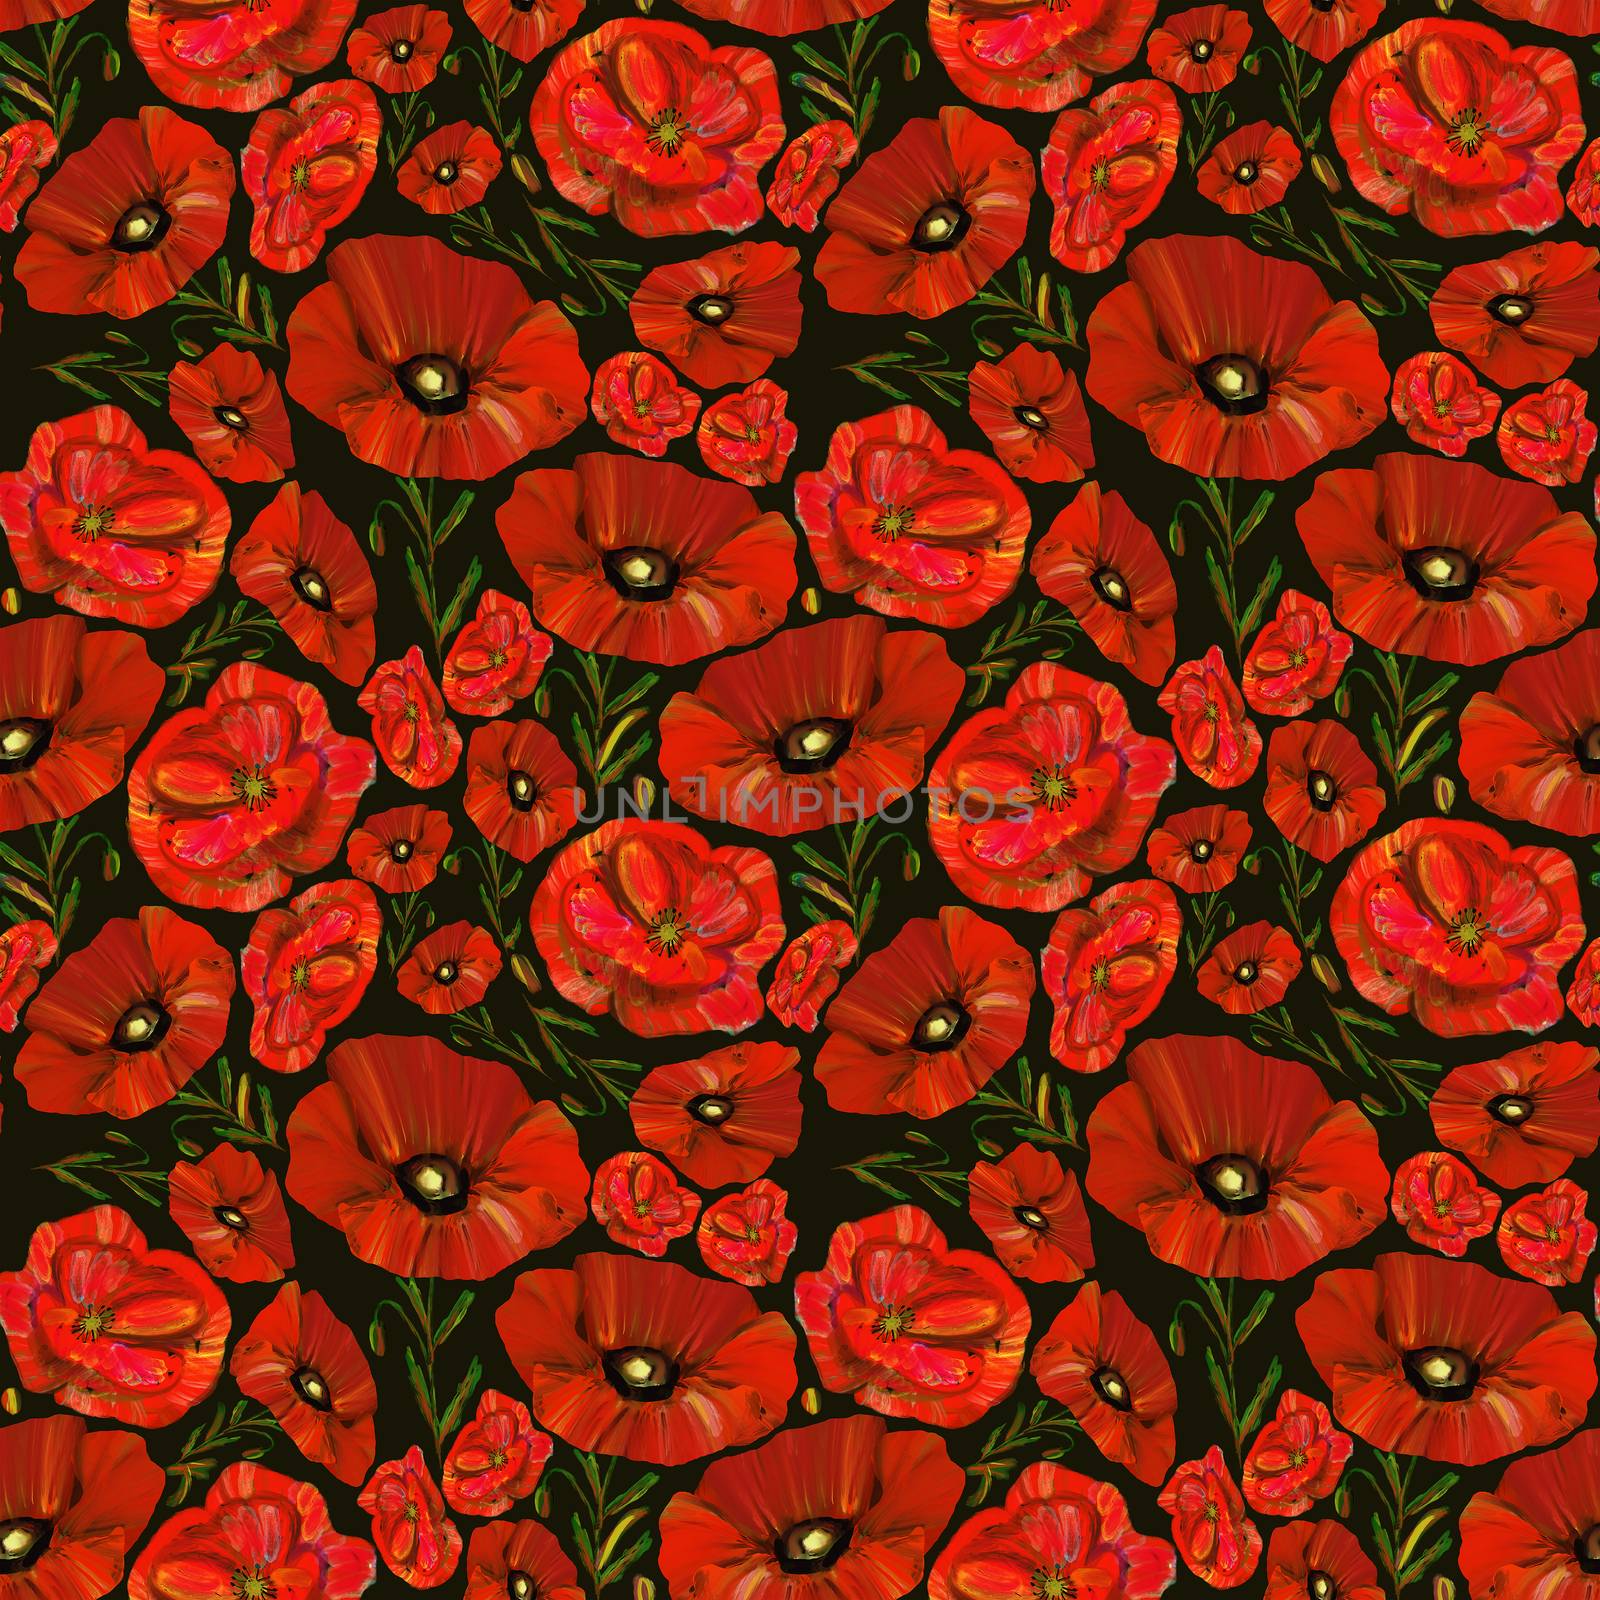 Red poppies seamless pattern on black background. Wildflower endless backdrop. Design illustration for textile, fabric, wrapping paper, cards.